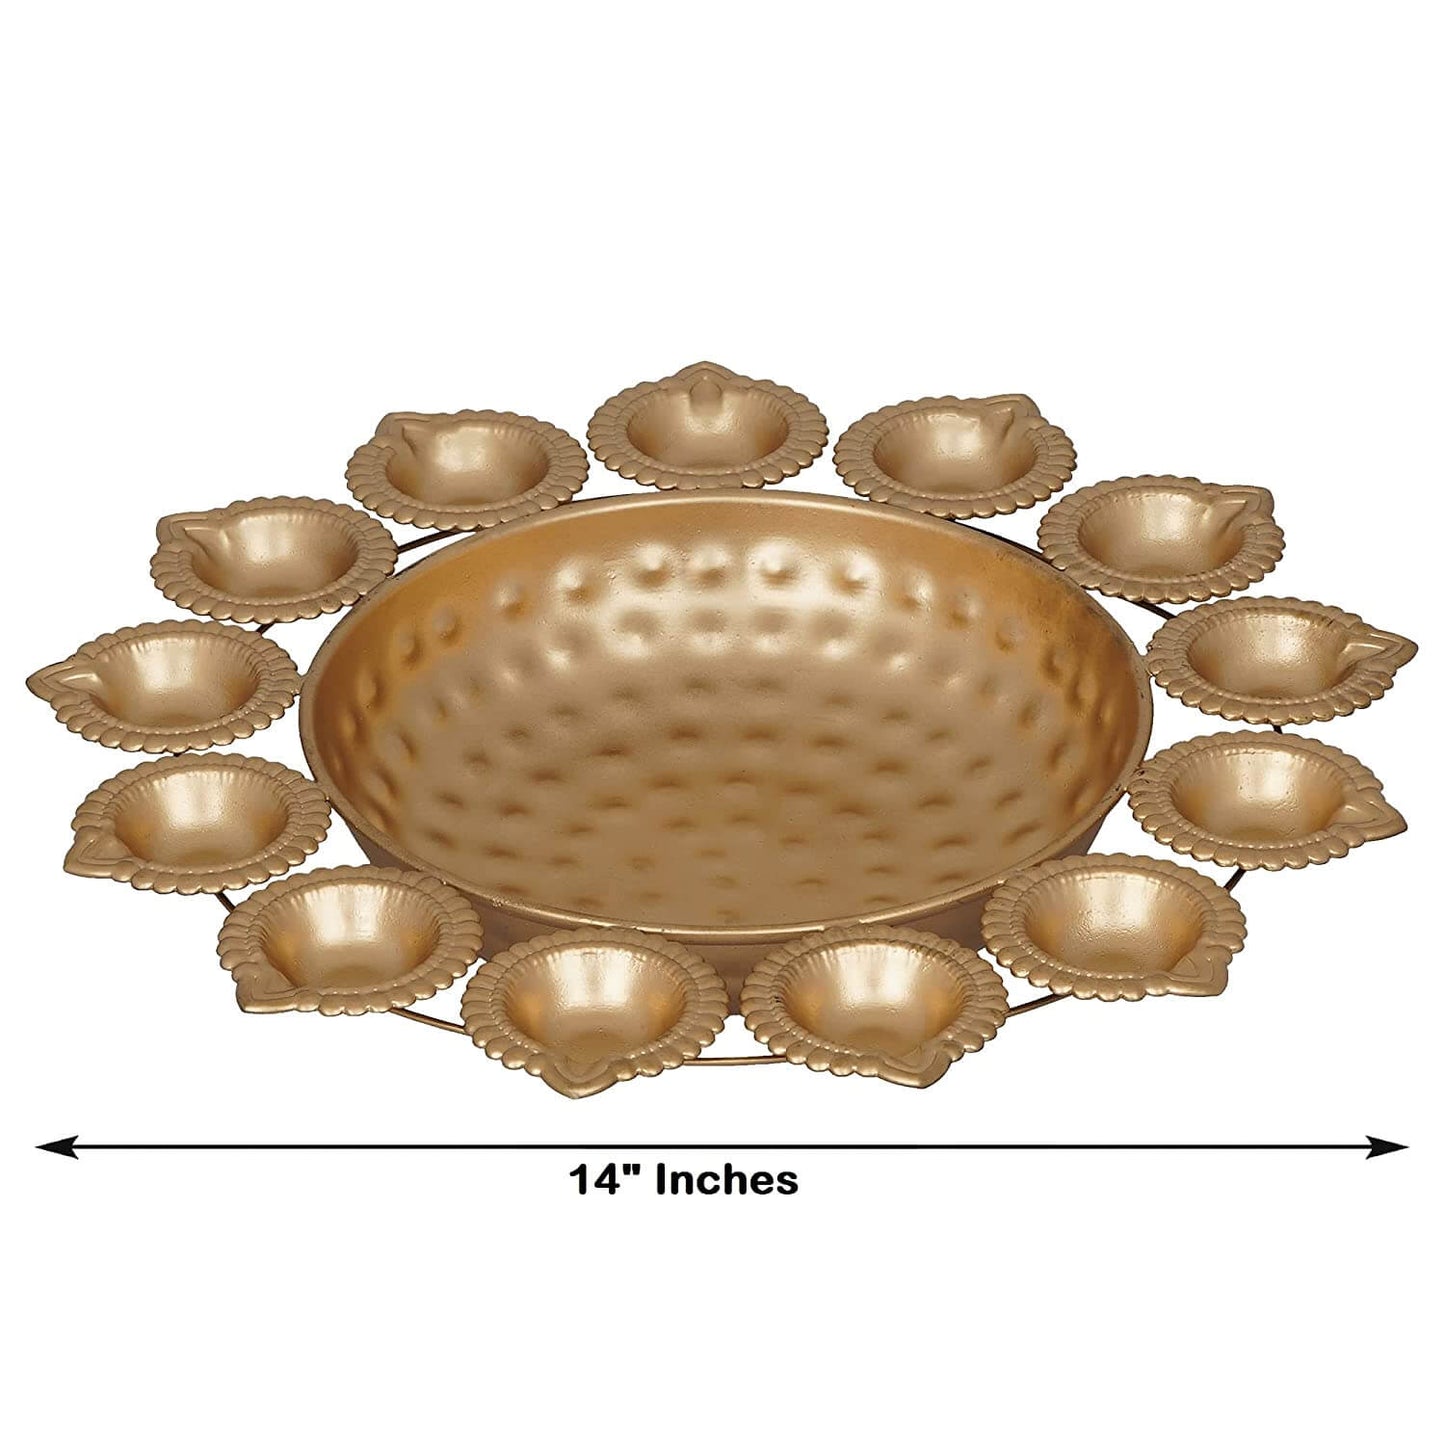 Diya Flower Shape Decorative Urli Handcrafted Bowl for Floating Flowers and Tea Light Candles Home ,Office and Table Decor (14 Inches)